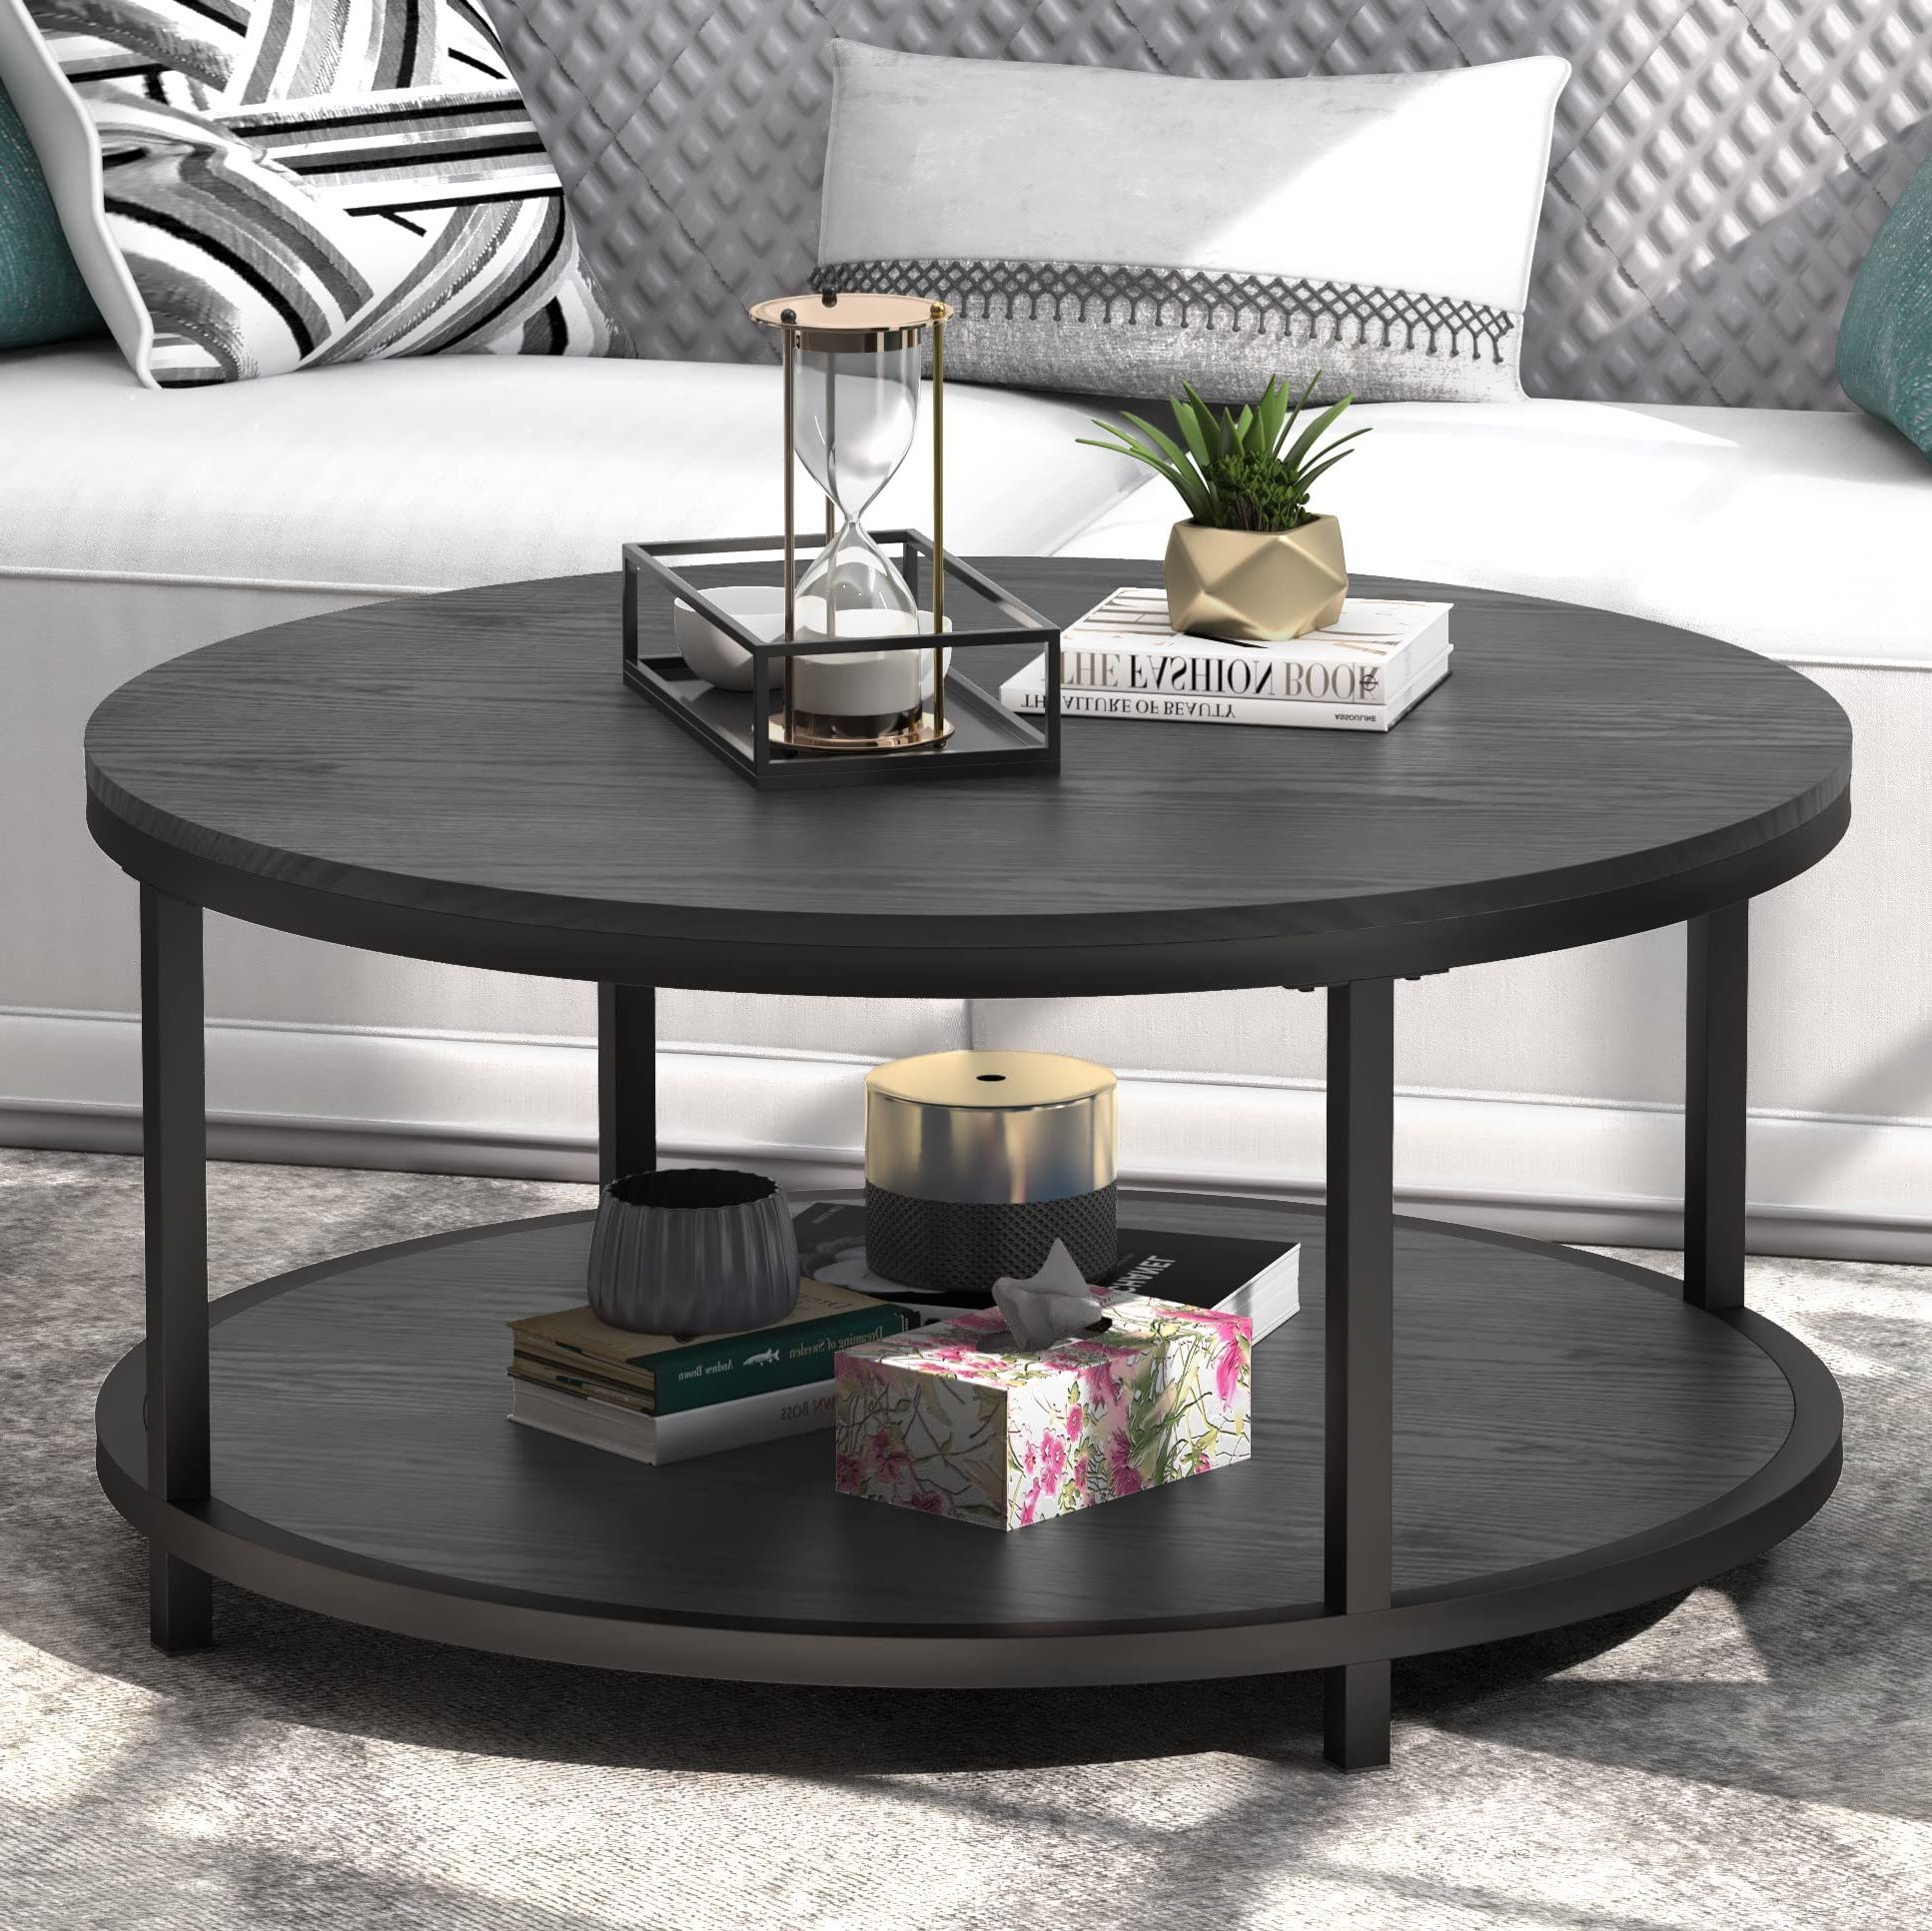 Trendy Full Black Round Coffee Tables With Regard To Edmaxwell Round Coffee Table Black Coffee Tables For Living Room 35.8"  Rustic Industrial Design Circle Table Furniture Sturdy Metal Frame Legs Cocktail  Table With Storage Open Shelf, Easy Assembly : Amazon.ca: Home (Photo 10 of 10)